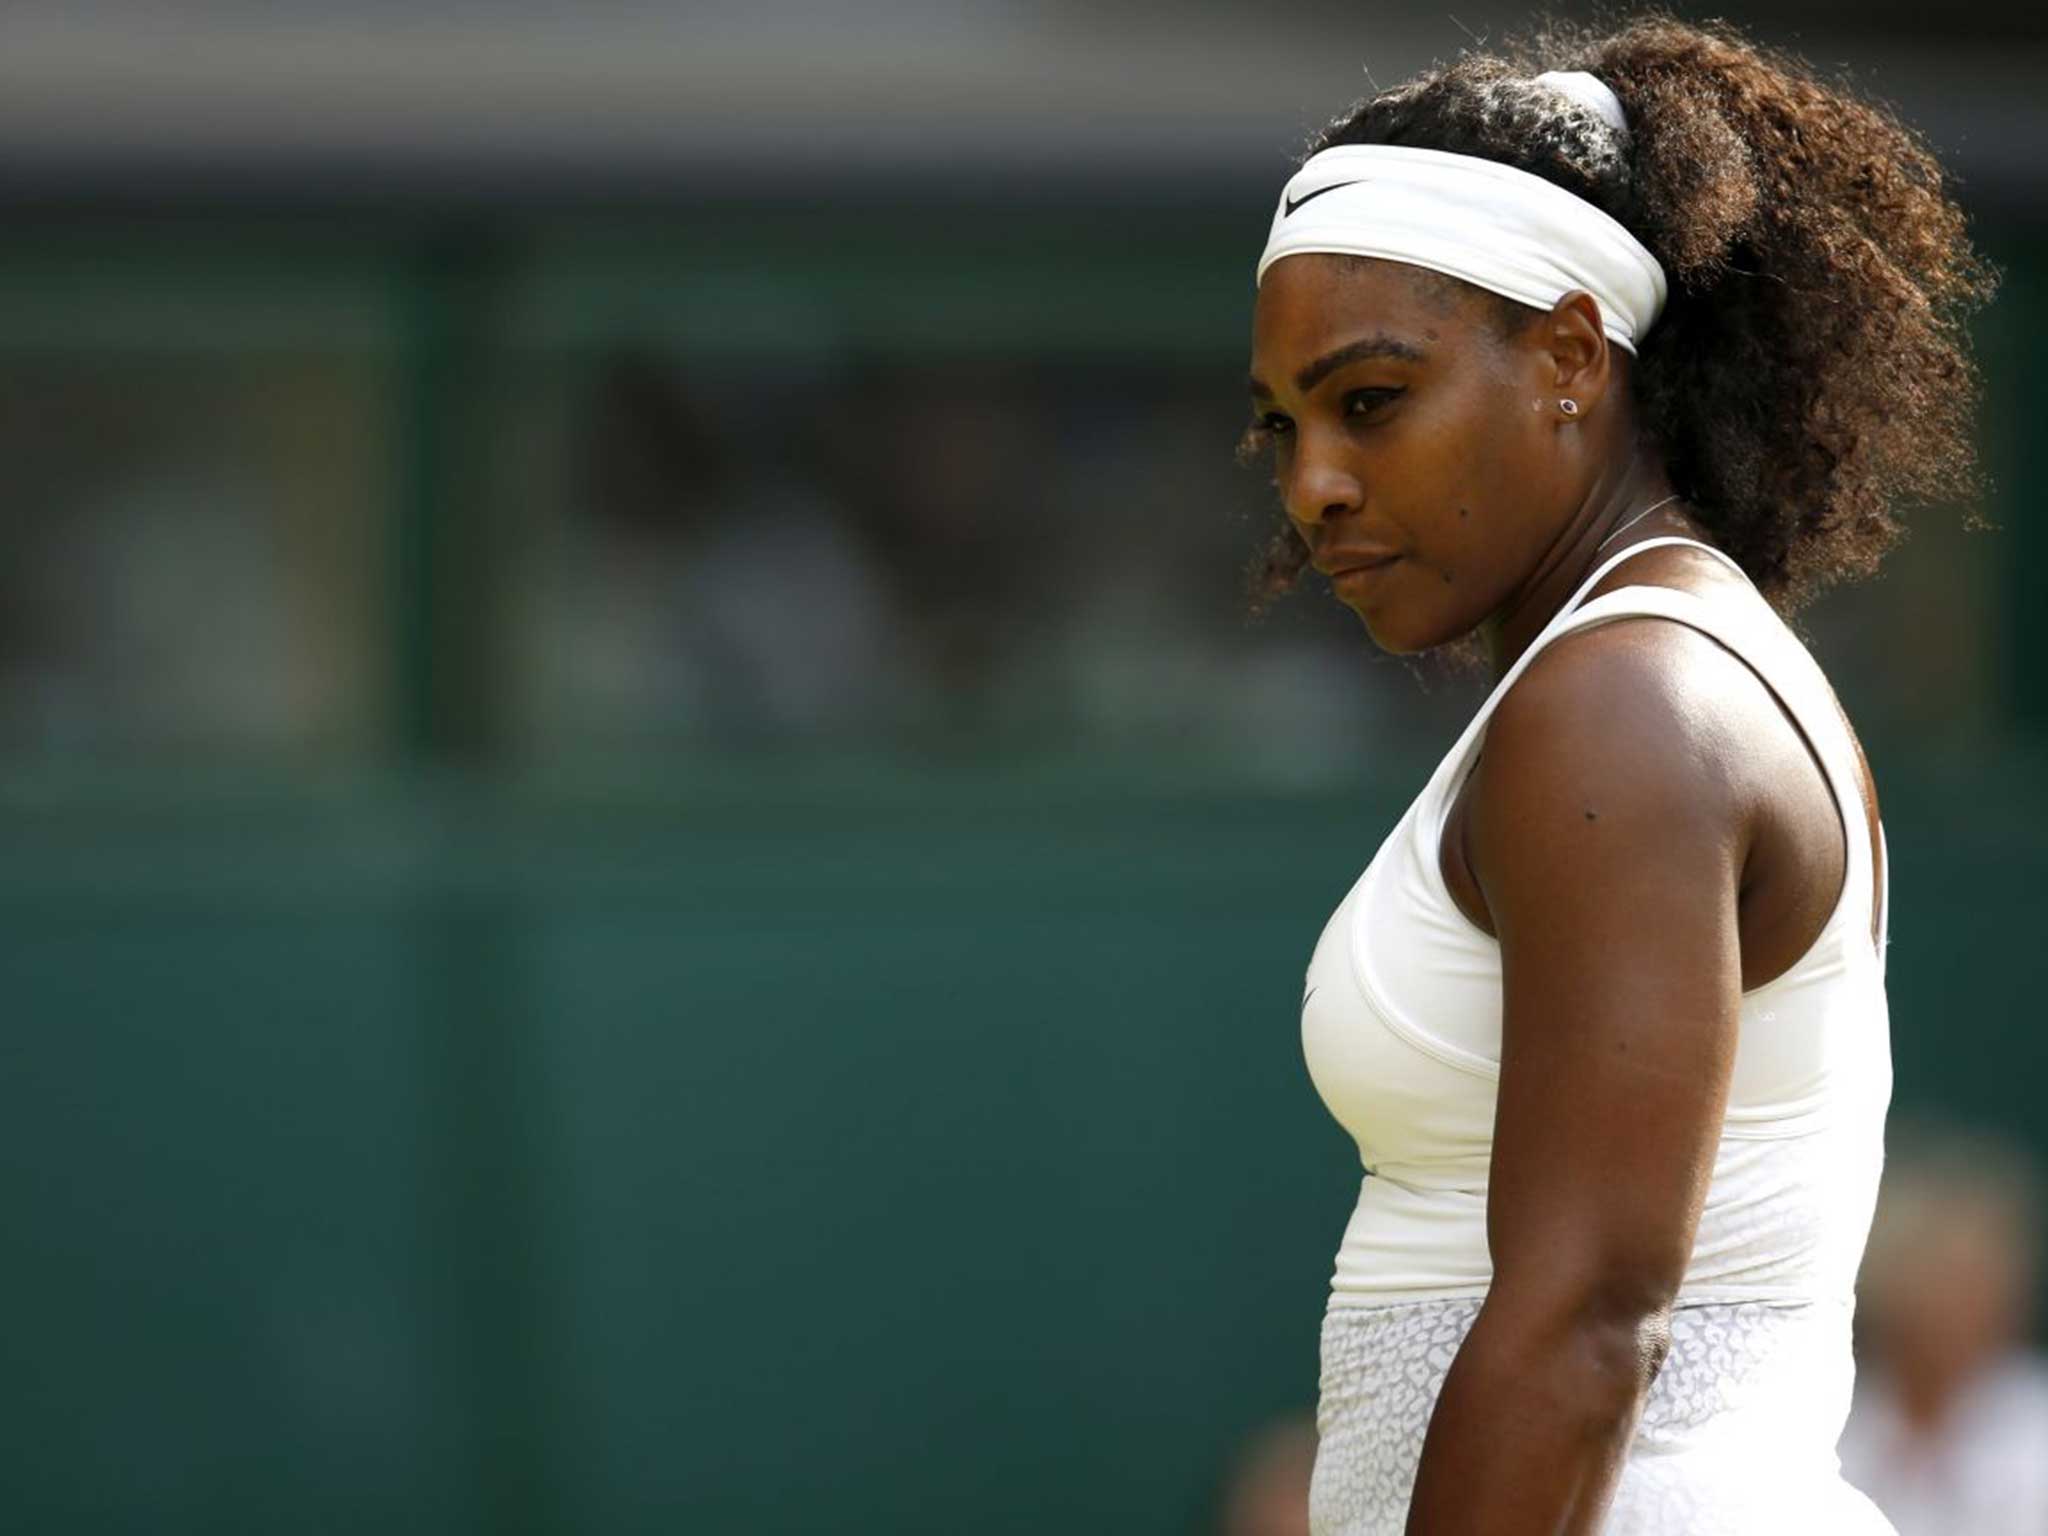 Serena Williams during a pause in play